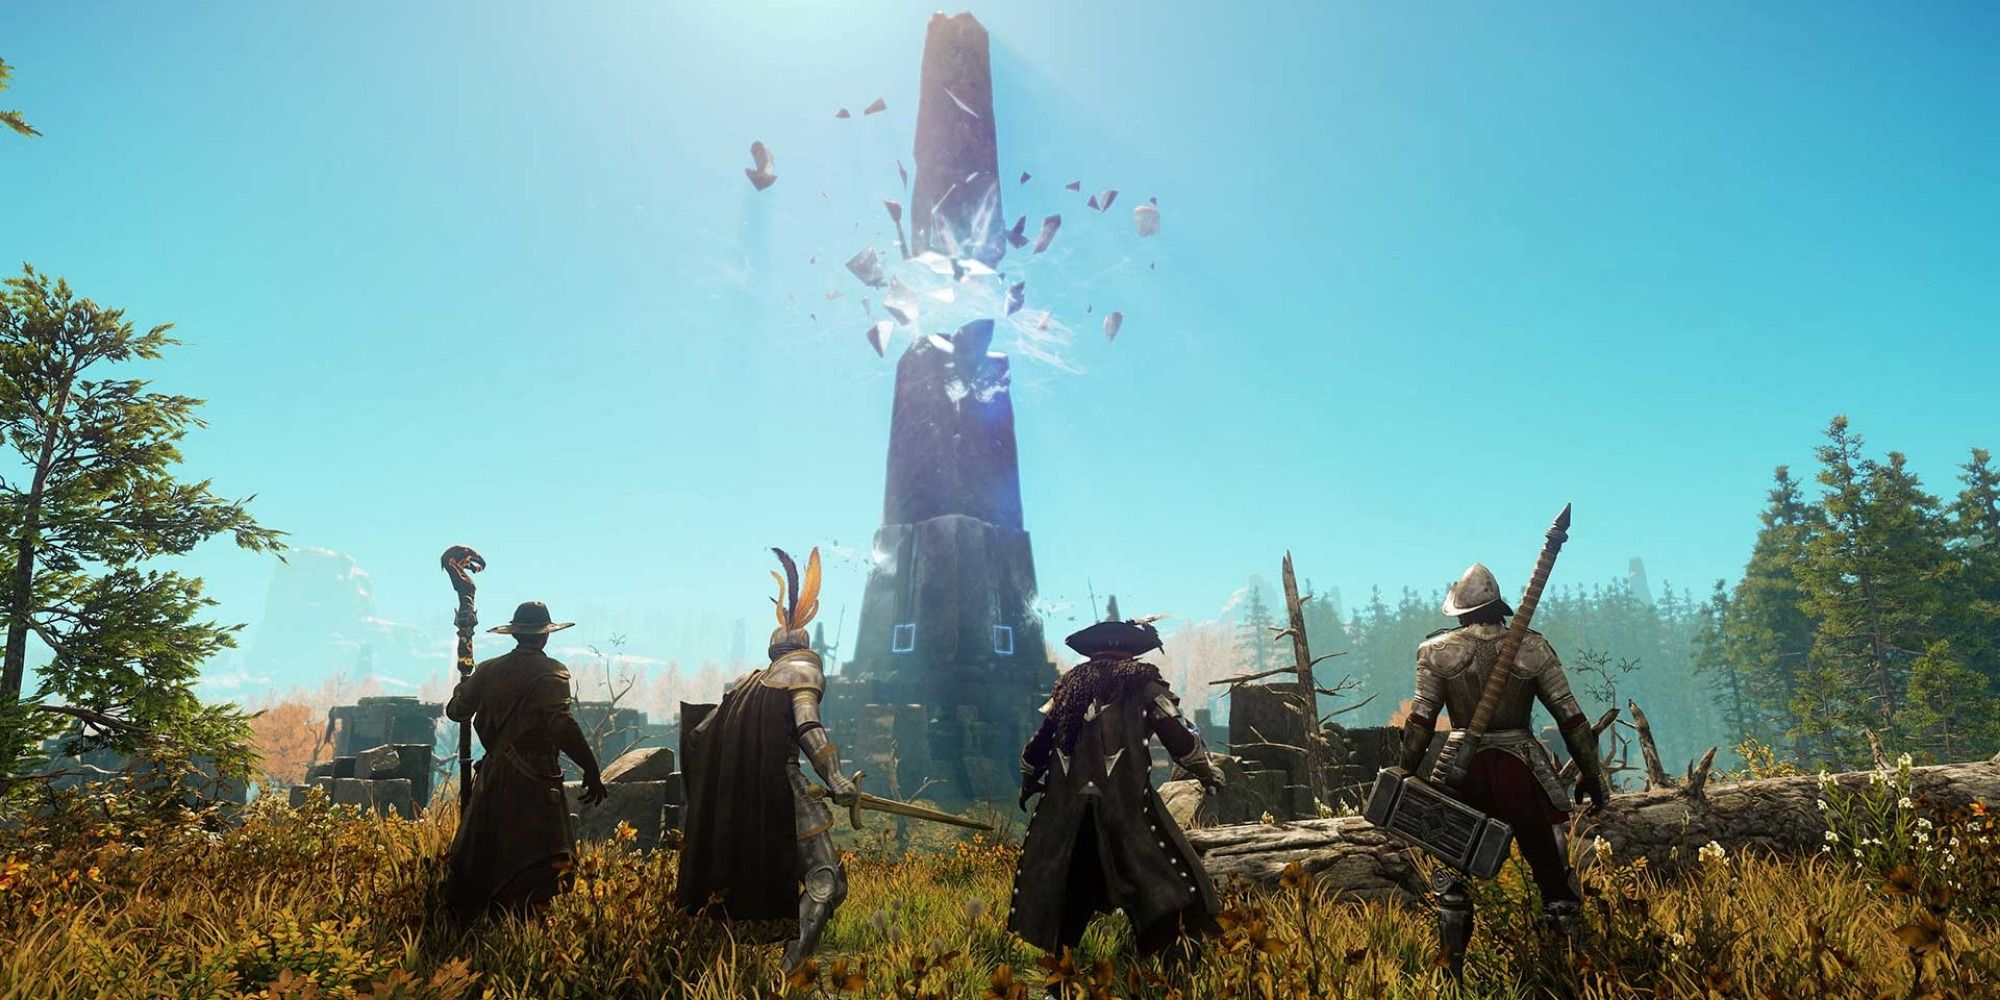 A group of armed players stand before the magically shattered obelisk